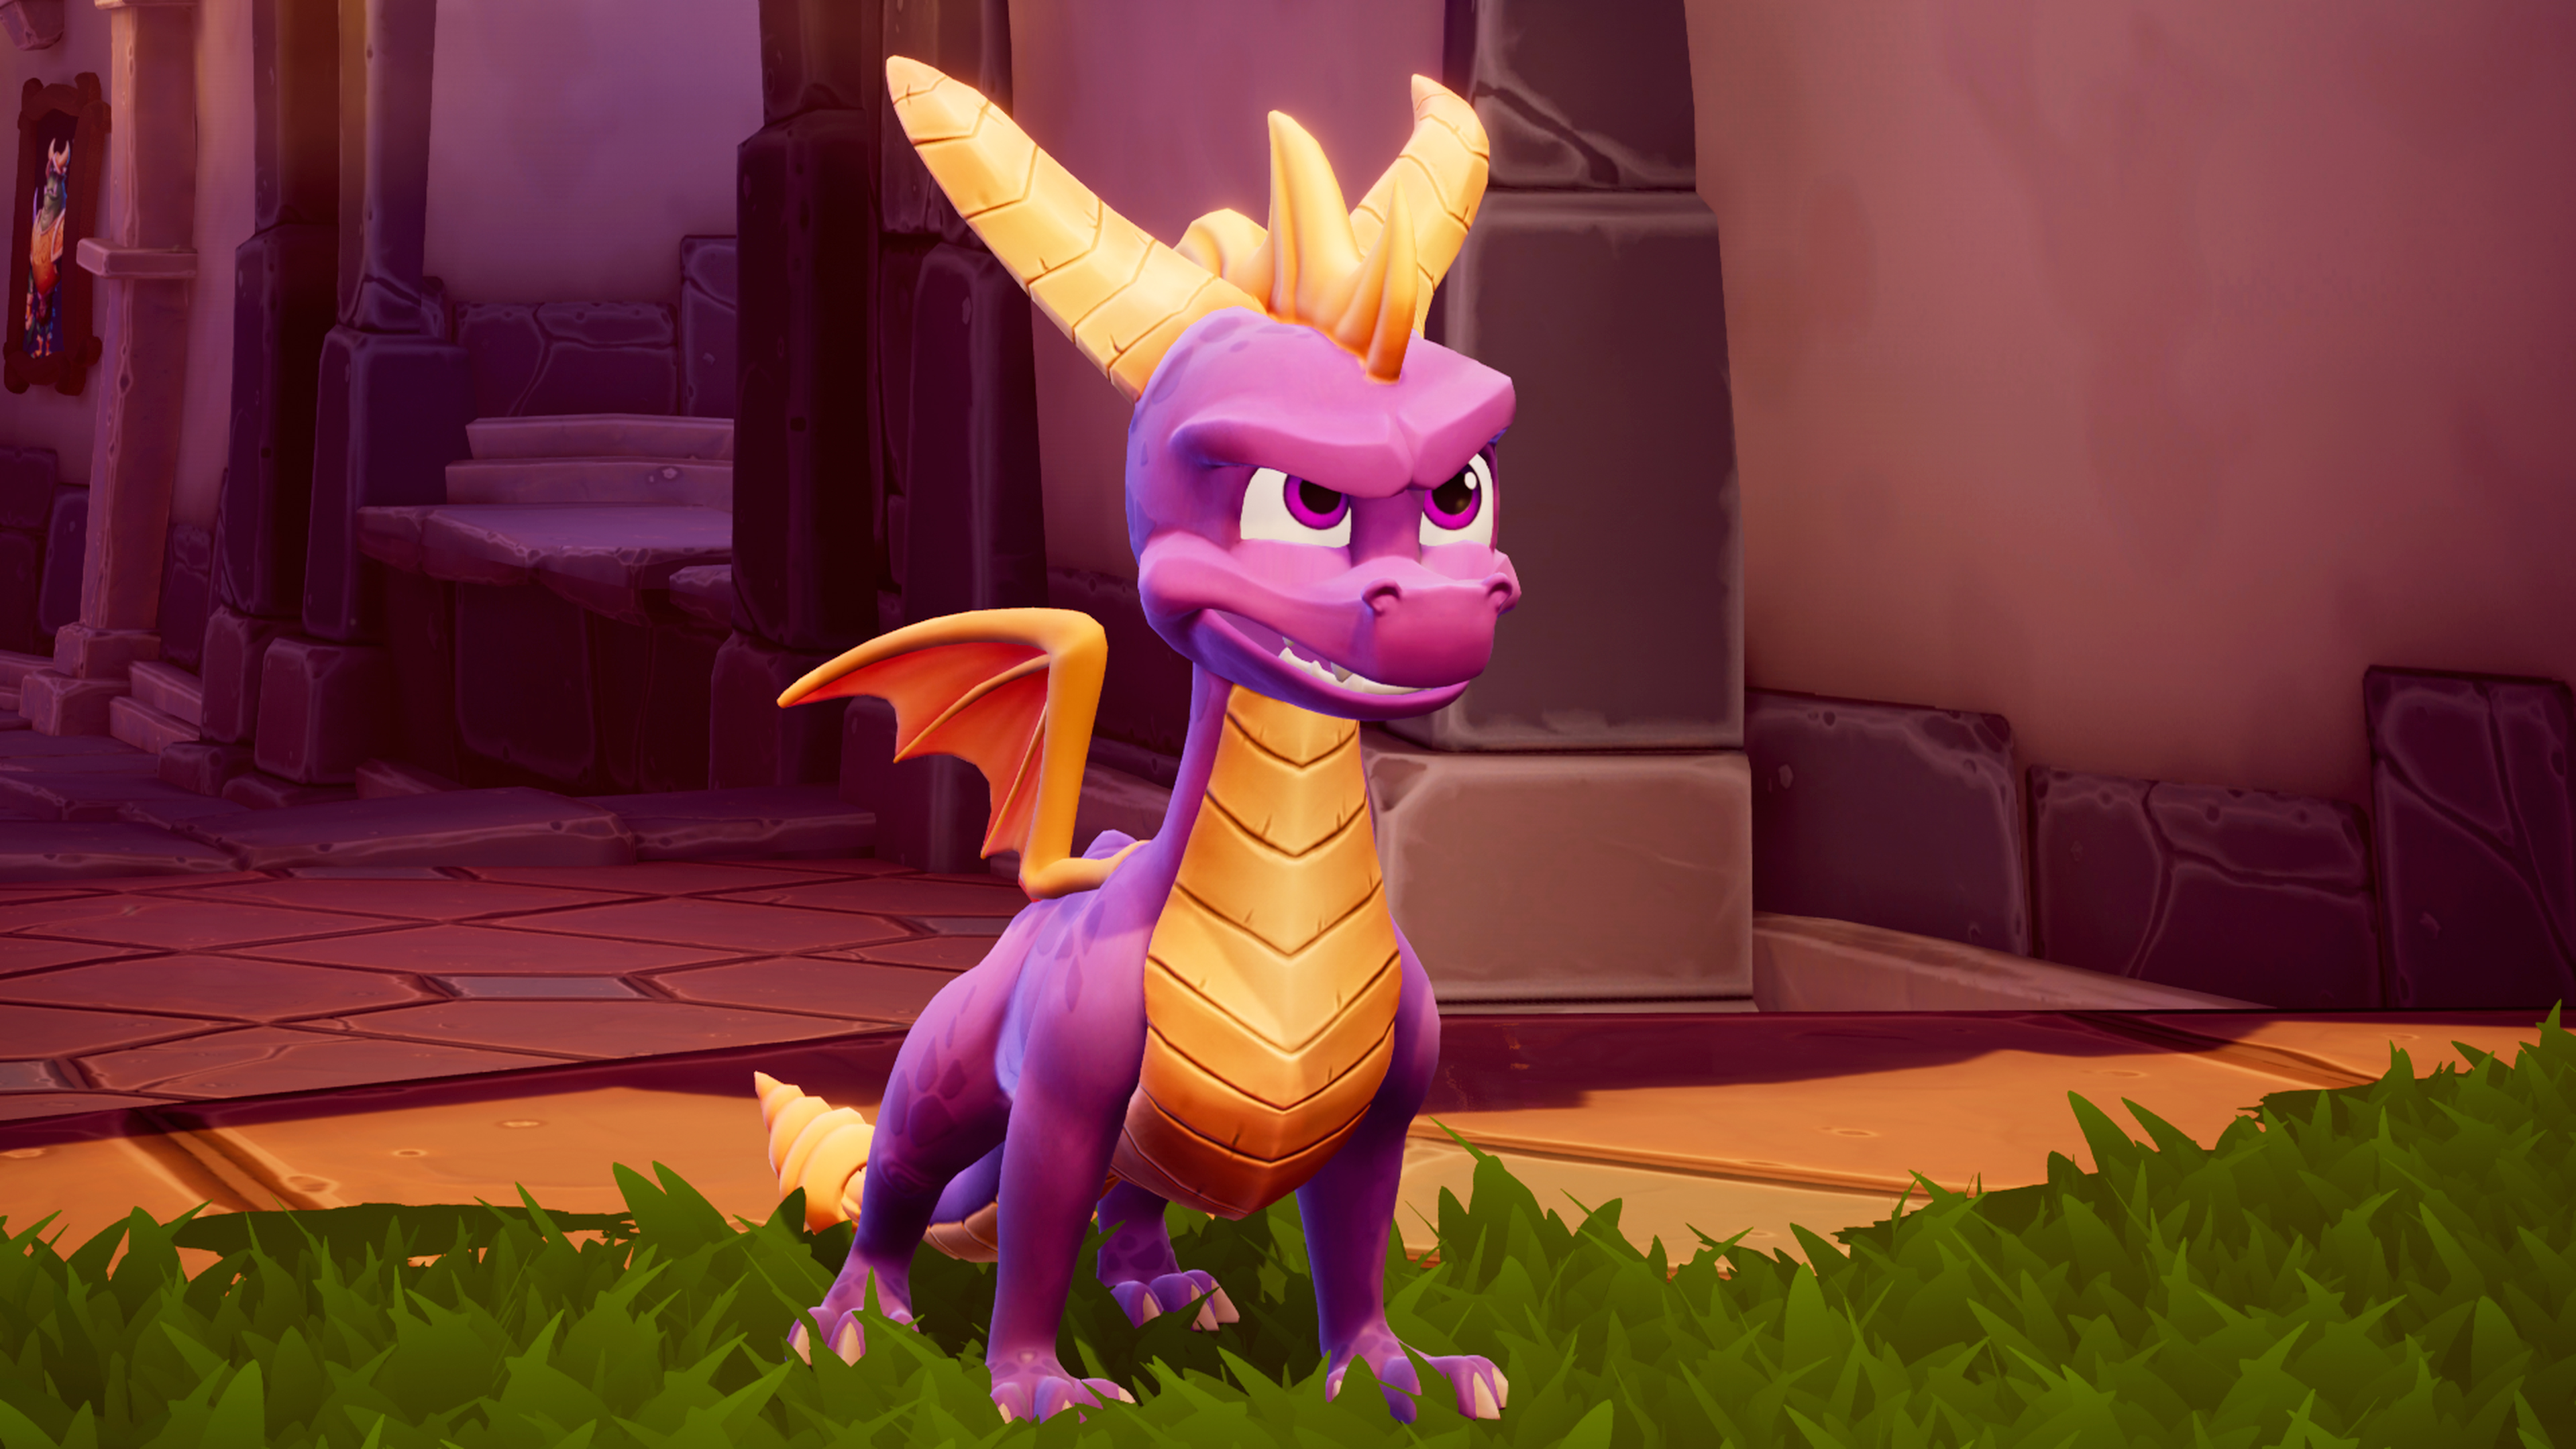 spyro-reignited-trilogy-officially-announced-screenshots-and-trailer-released-just-push-start